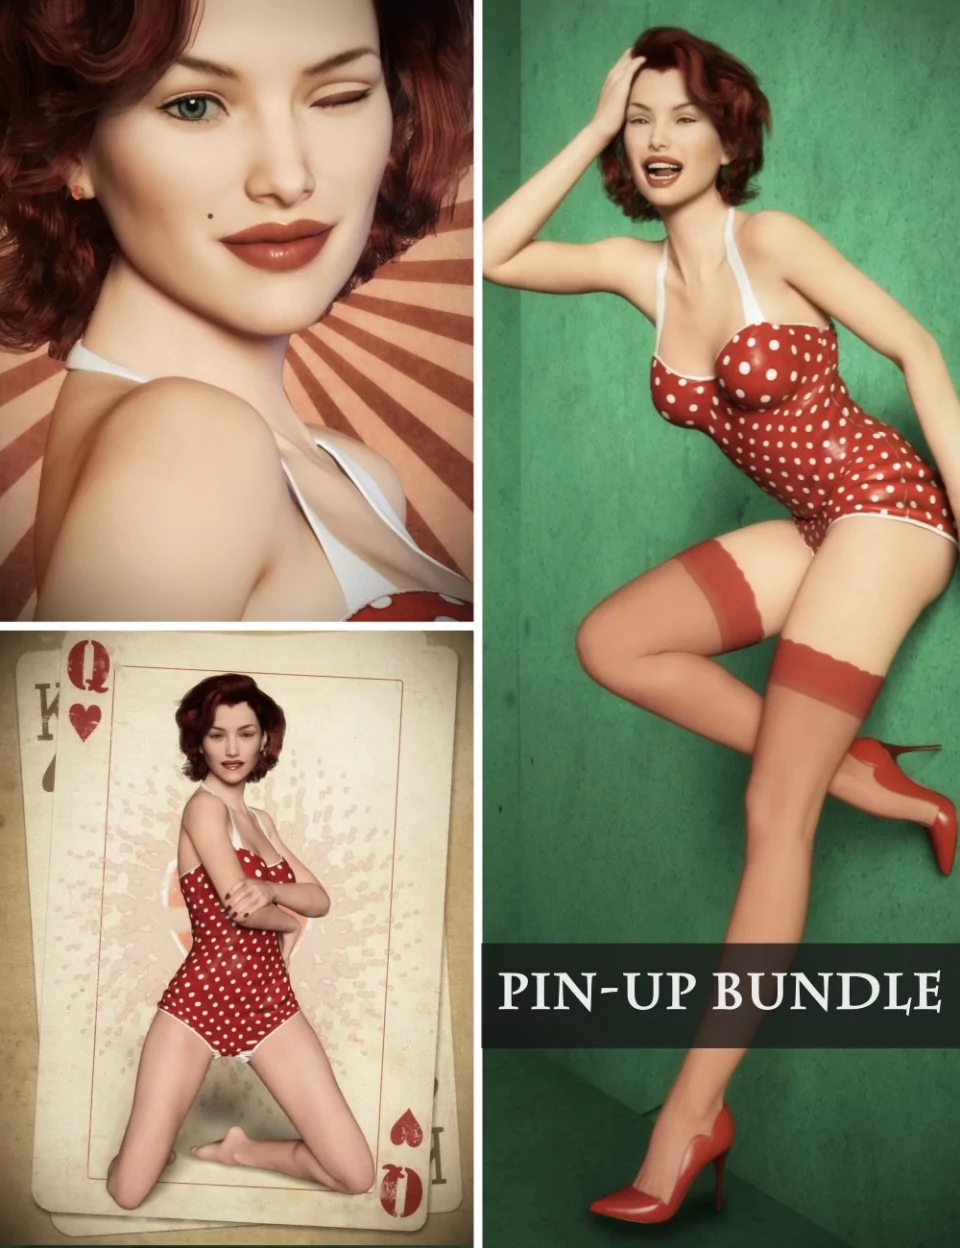 00-main-pin-up-backgrounds-poses-and-expressions-daz3d